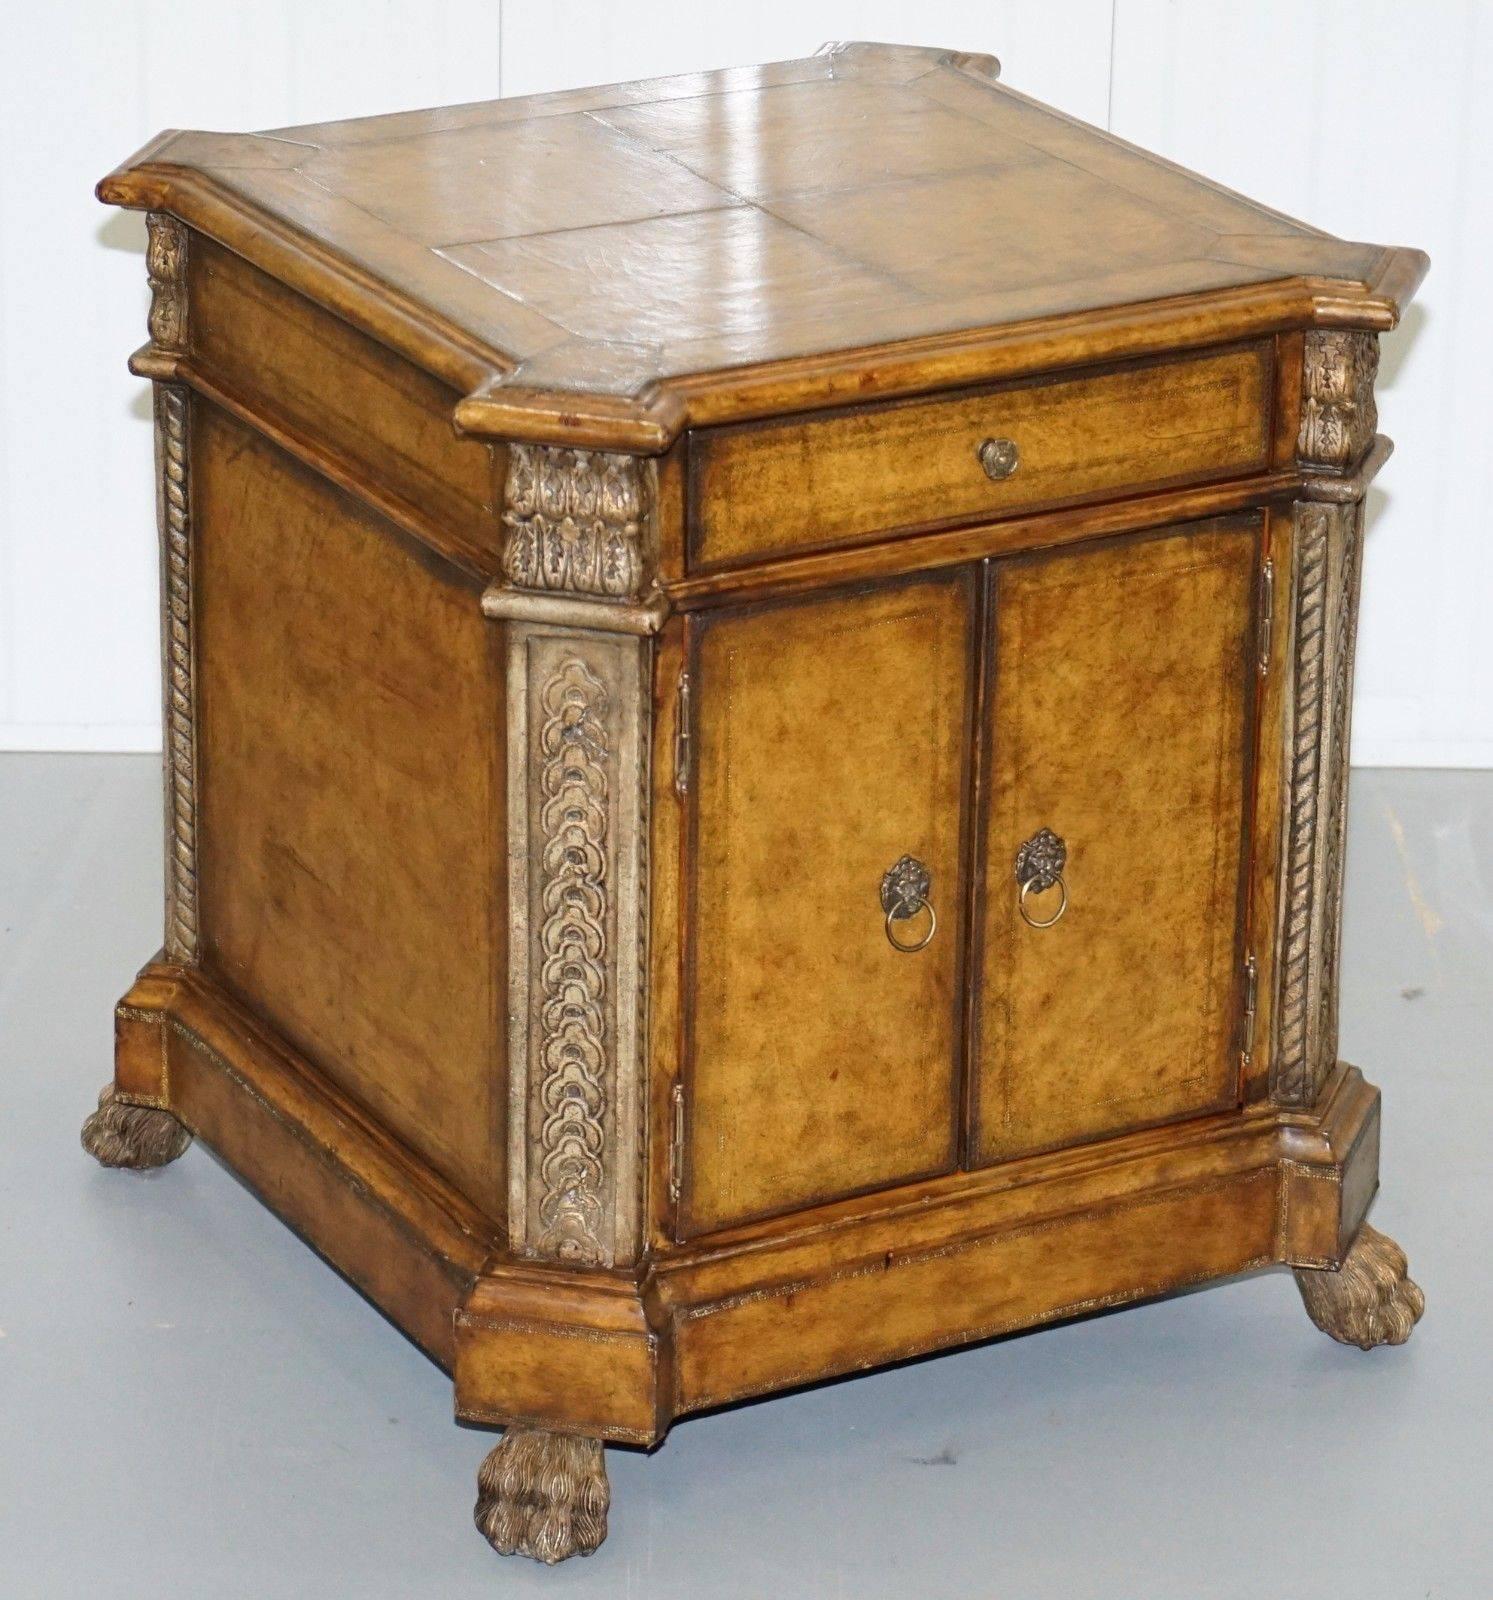 Wimbledon-Furniture

Wimbledon-Furniture is delighted to offer for sale this stunning Regency styled leather clad and panelled with Lion hairy paw feet and handles cupboard table

Please note the delivery fee listed is just a guide, for an accurate